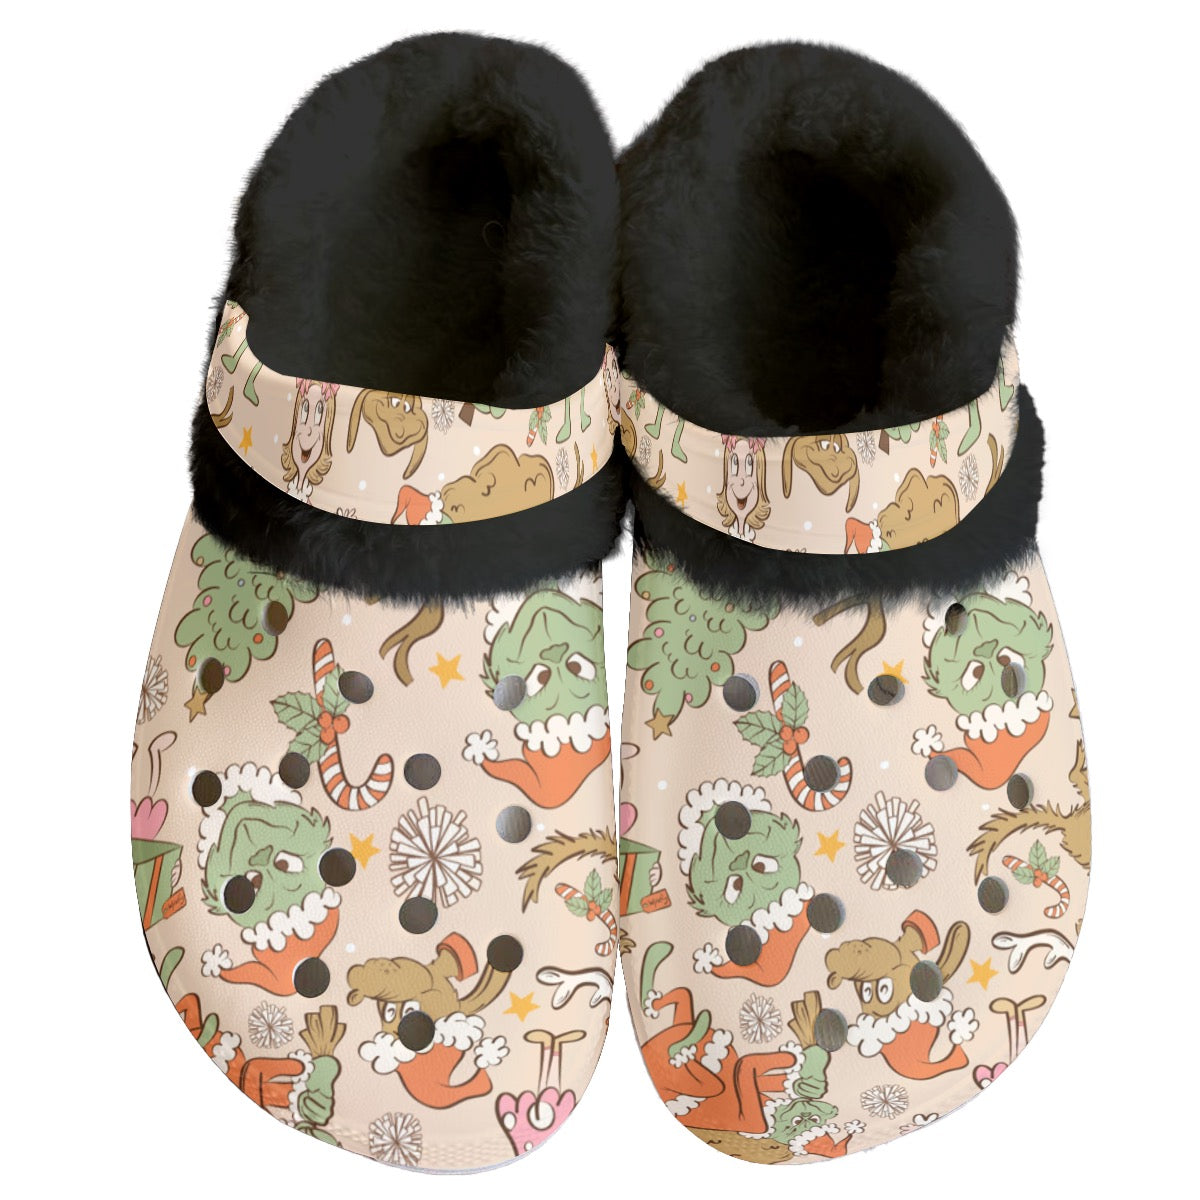 Green man, Cindy, & Max fluffy clogs PRE ORDER (14-18 Business day turnaround time.)